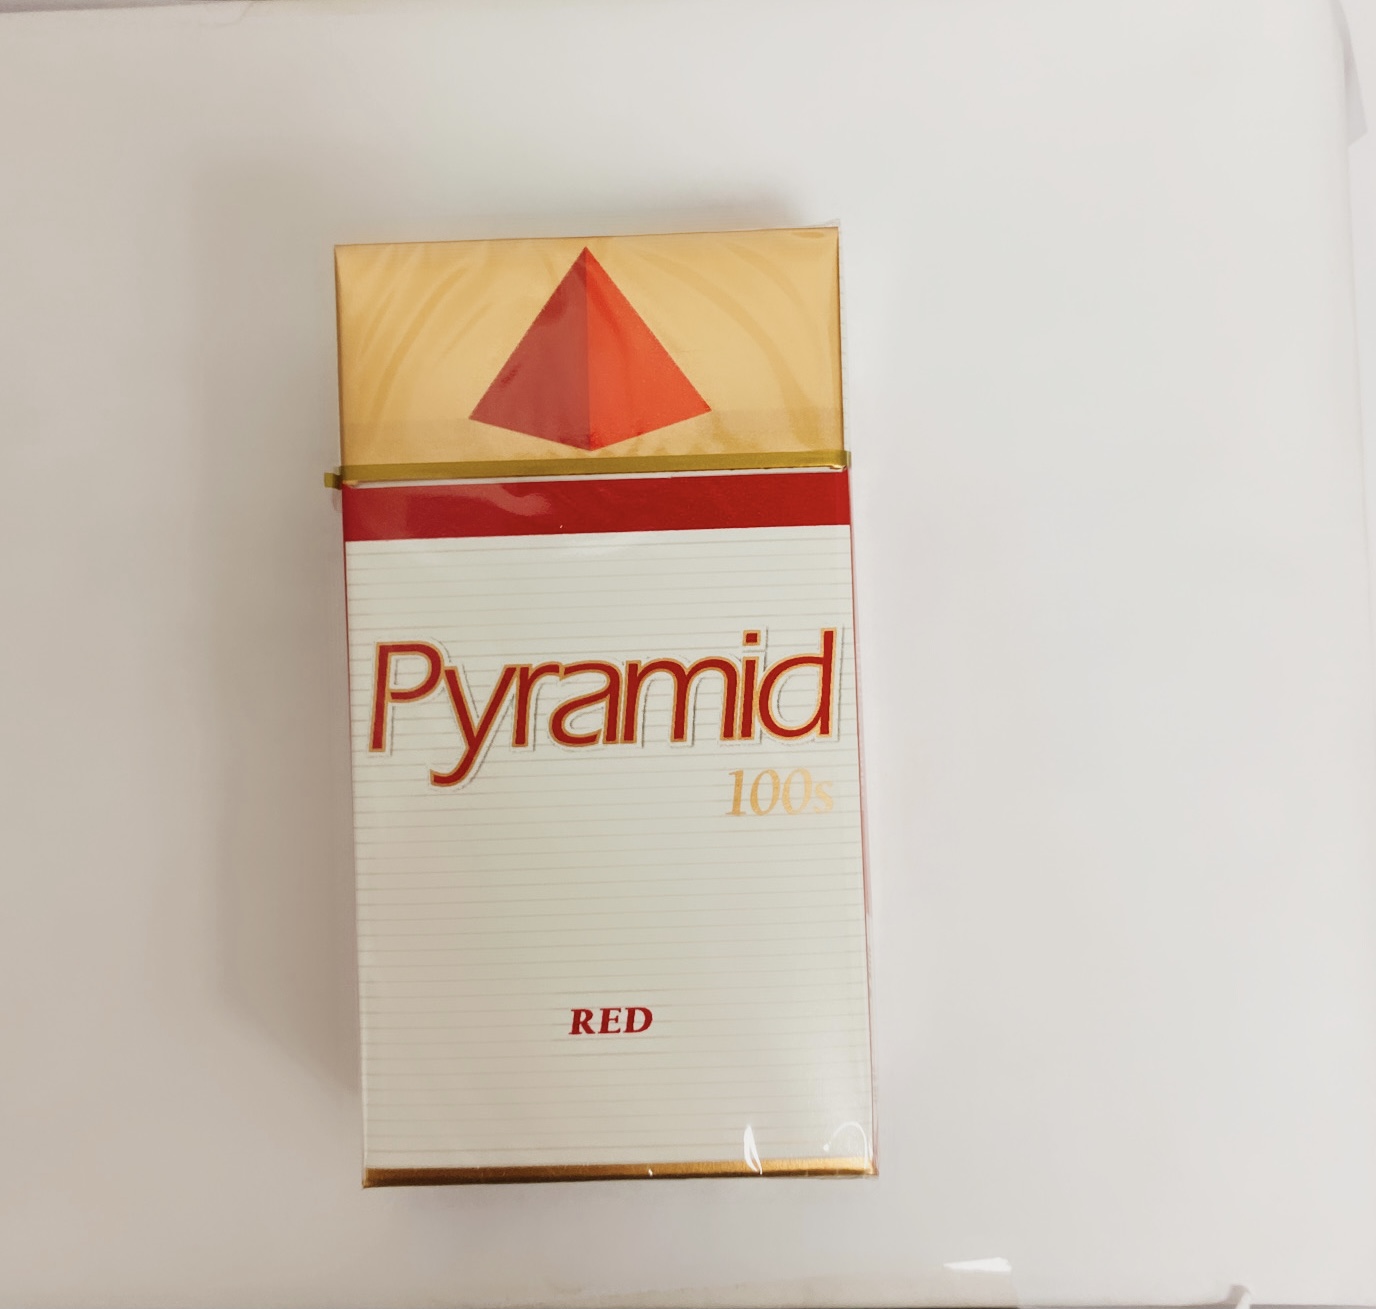 PYRAMID BOX 100 - Martin & Snyder Product Sales